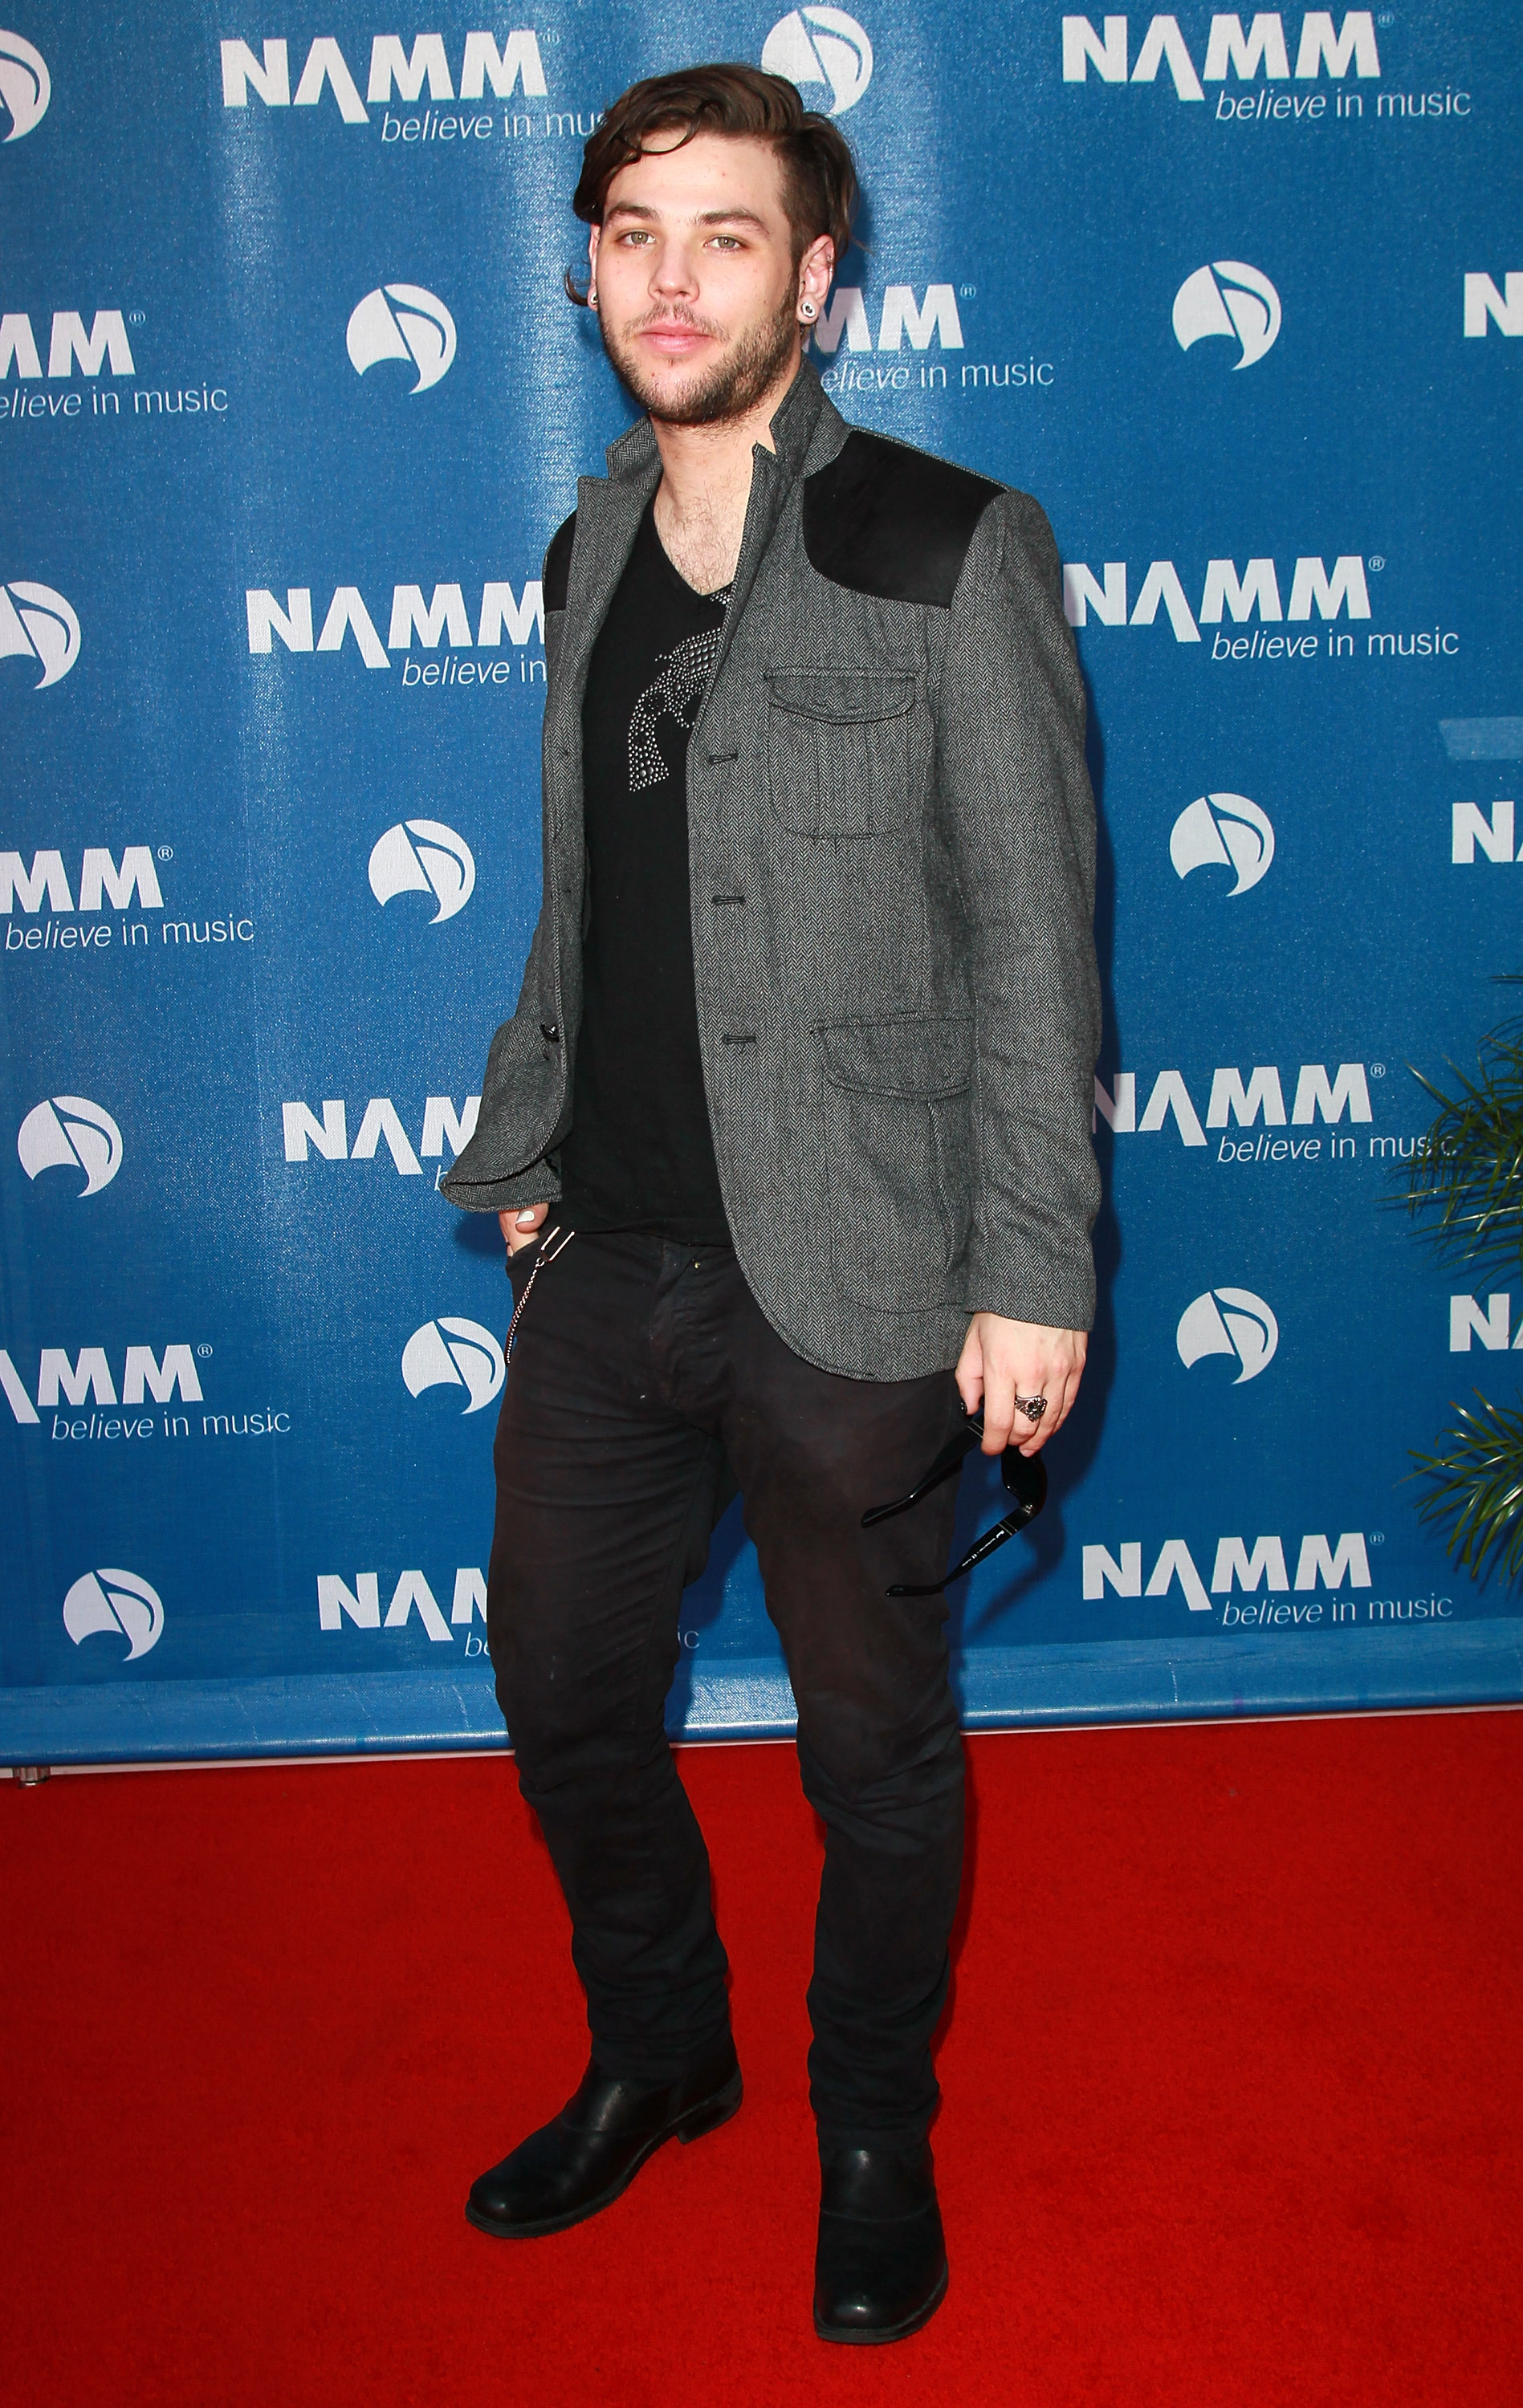 Navarone Garibaldi at the 110th NAMM Show - Day 1 at the Anaheim Convention Center in Anaheim, California, on January 19, 2012. | Source: Getty Images